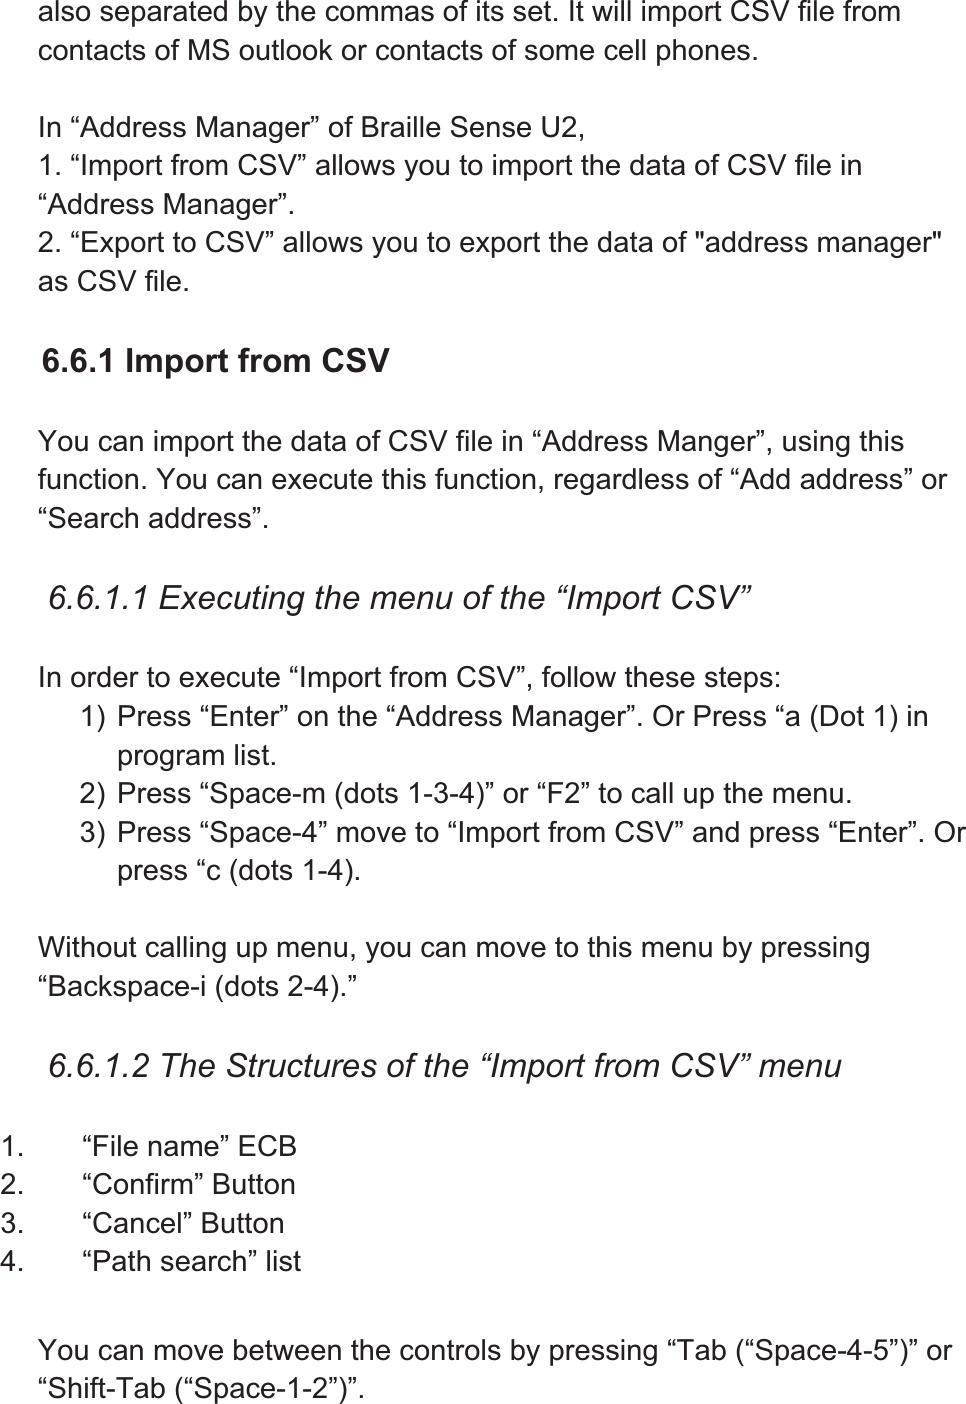 also separated by the commas of its set. It will import CSV file from contacts of MS outlook or contacts of some cell phones. In “Address Manager” of Braille Sense U2, 1. “Import from CSV” allows you to import the data of CSV file in “Address Manager”. 2. “Export to CSV” allows you to export the data of &quot;address manager&quot; as CSV file. 6.6.1 Import from CSV You can import the data of CSV file in “Address Manger”, using this function. You can execute this function, regardless of “Add address” or “Search address”. 6.6.1.1 Executing the menu of the “Import CSV” In order to execute “Import from CSV”, follow these steps: 1) Press “Enter” on the “Address Manager”. Or Press “a (Dot 1) in program list. 2) Press “Space-m (dots 1-3-4)” or “F2” to call up the menu. 3) Press “Space-4” move to “Import from CSV” and press “Enter”. Or press “c (dots 1-4). Without calling up menu, you can move to this menu by pressing “Backspace-i (dots 2-4).” 6.6.1.2 The Structures of the “Import from CSV” menu 1.  “File name” ECB 2. “Confirm” Button 3. “Cancel” Button 4. “Path search” list You can move between the controls by pressing “Tab (“Space-4-5”)” or “Shift-Tab (“Space-1-2”)”. 